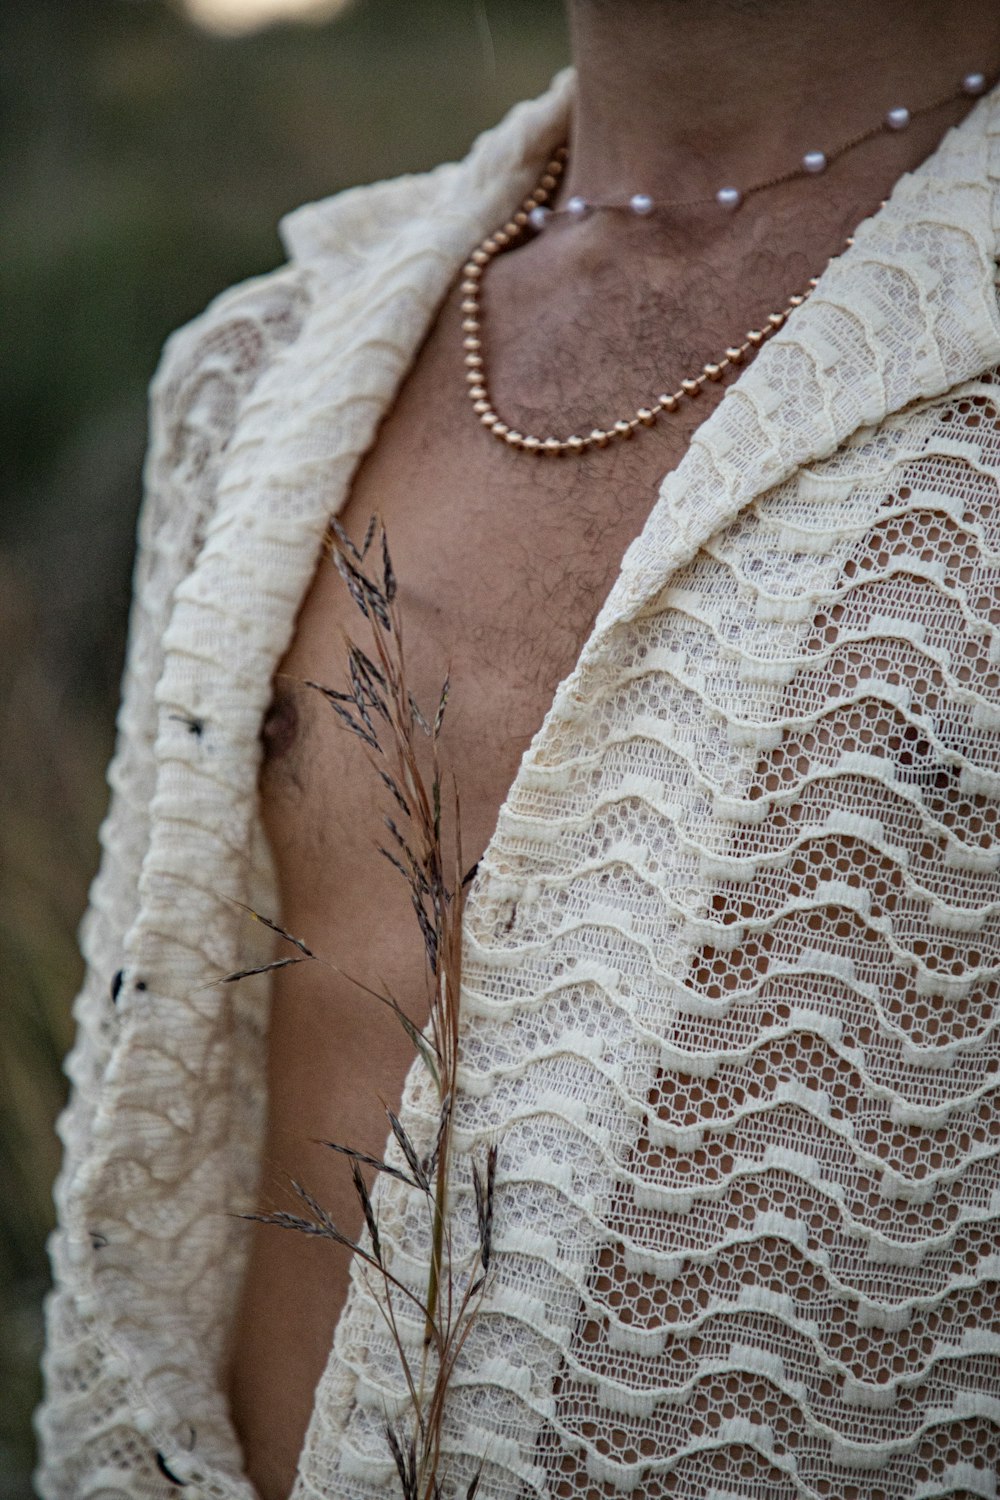 a close up of a person wearing a shirt and a necklace